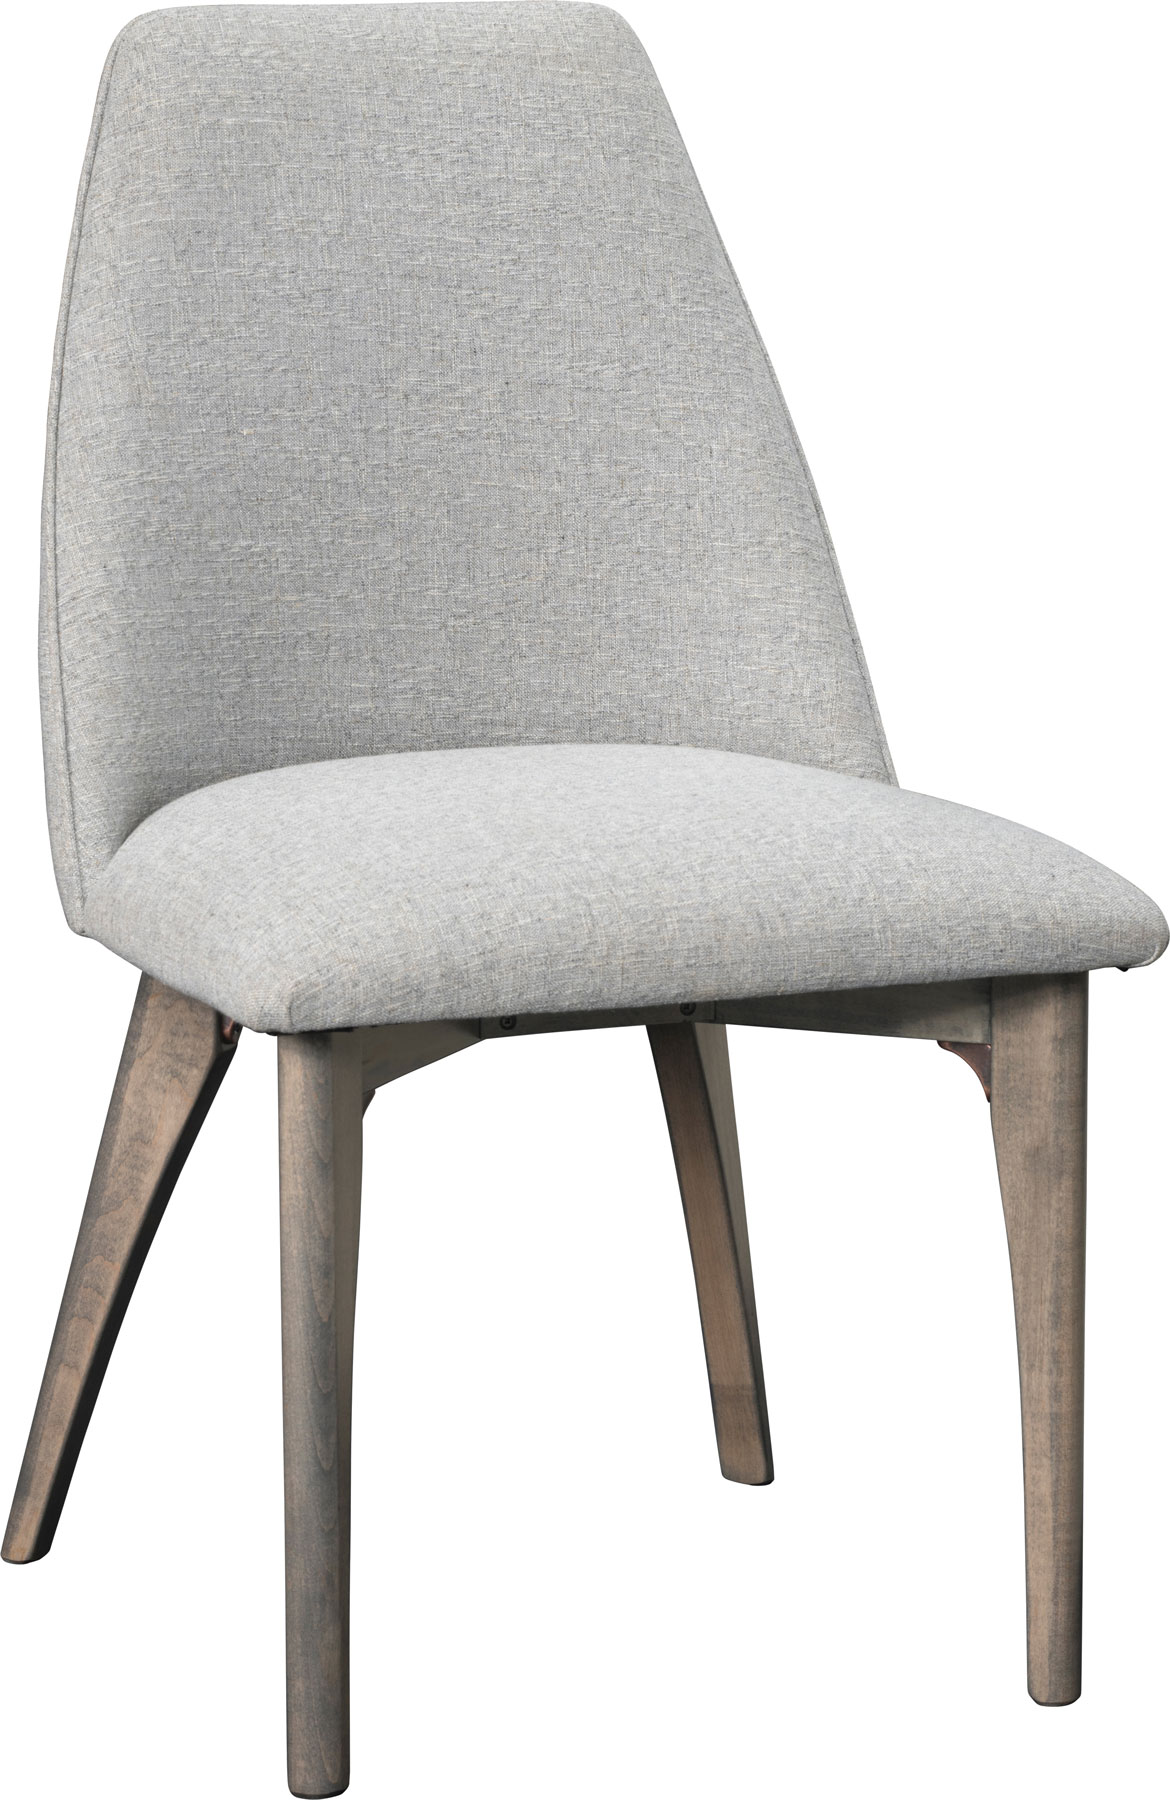 Orca Side Upholstered Dining Chair